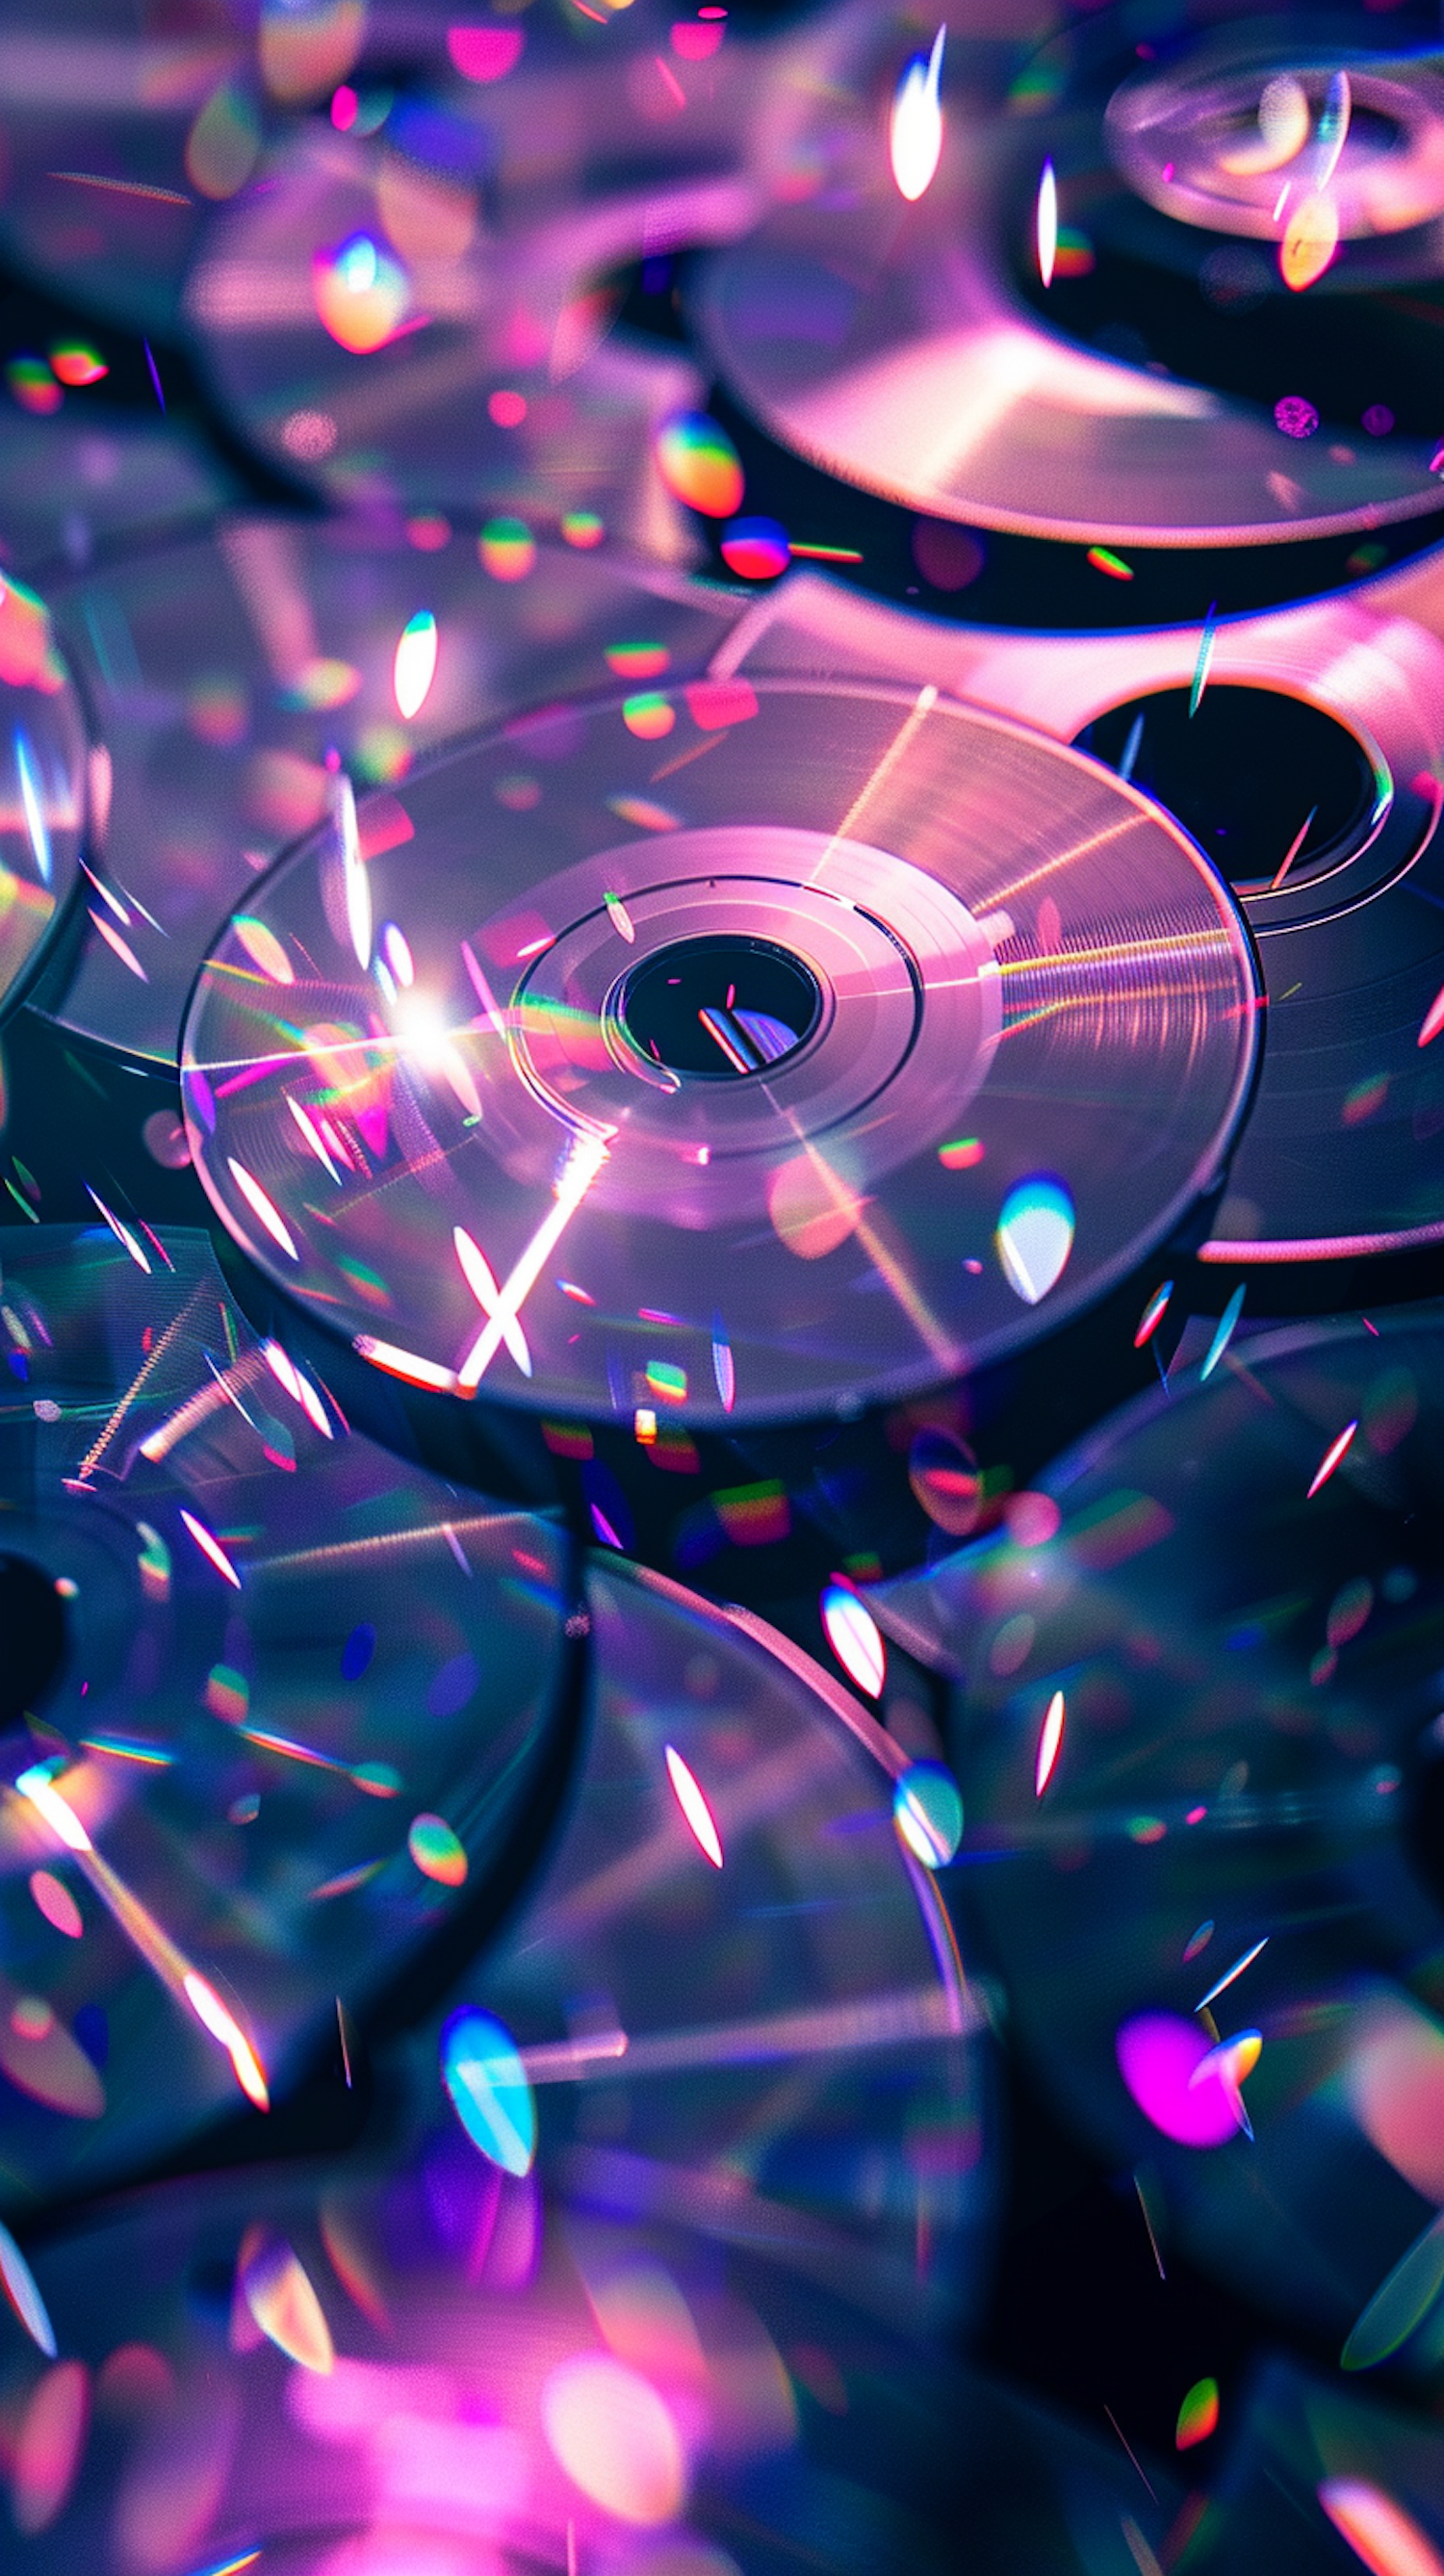 Kaleidoscope of Colors in CD Pile